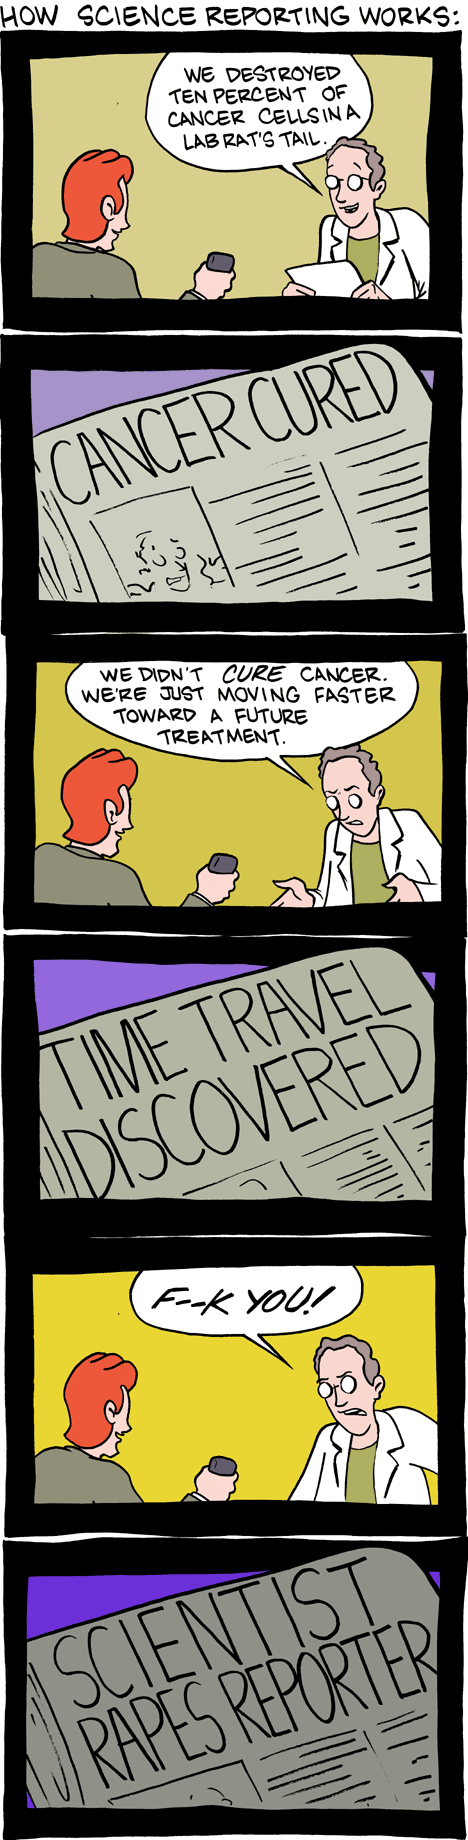 smbc-comics.com How Science reporting works.png